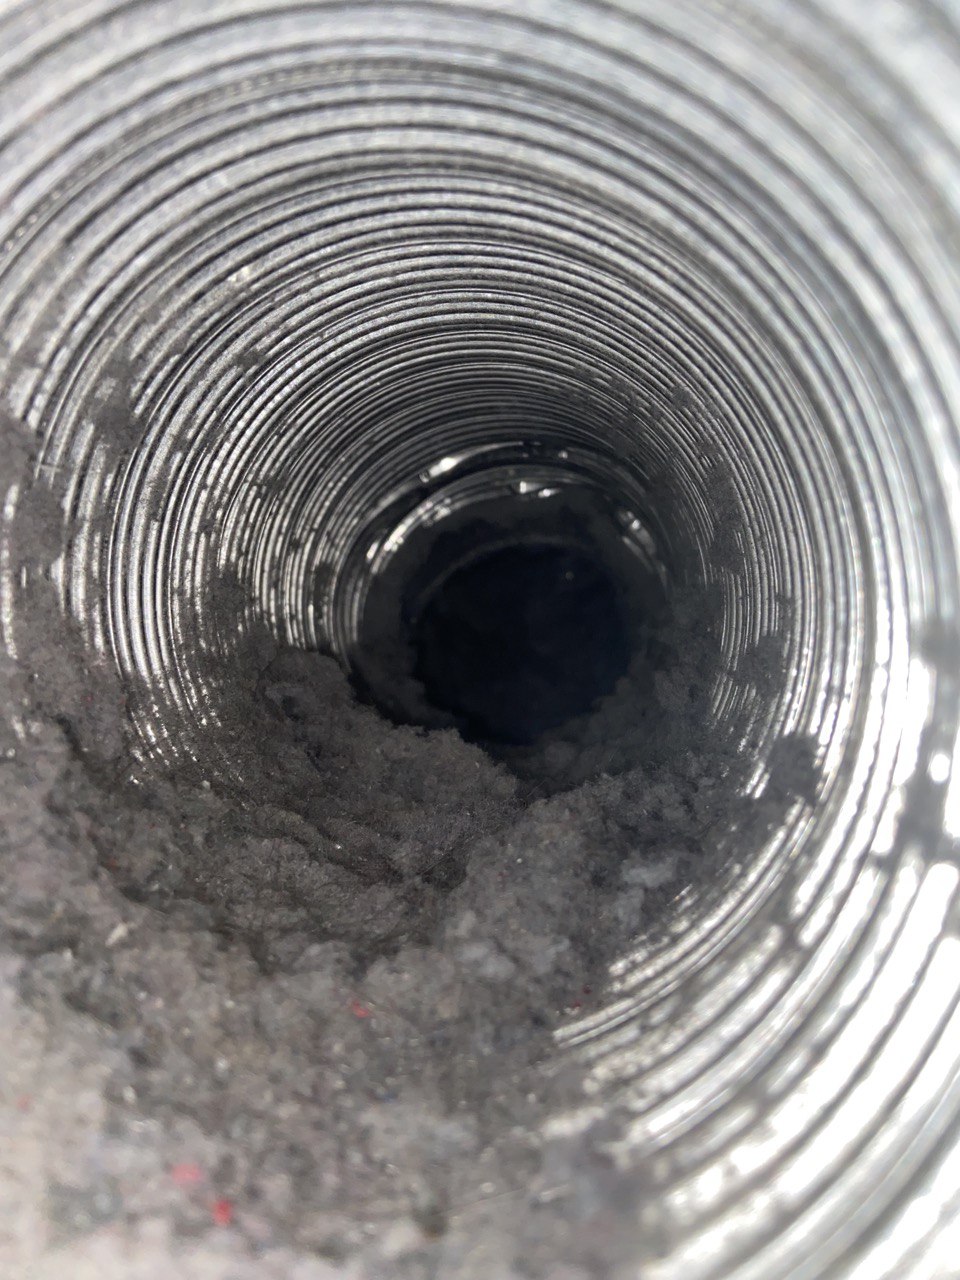 Cleaning Your Dryer Vent: Tips from a Professional Dryer Vent Cleaning Service